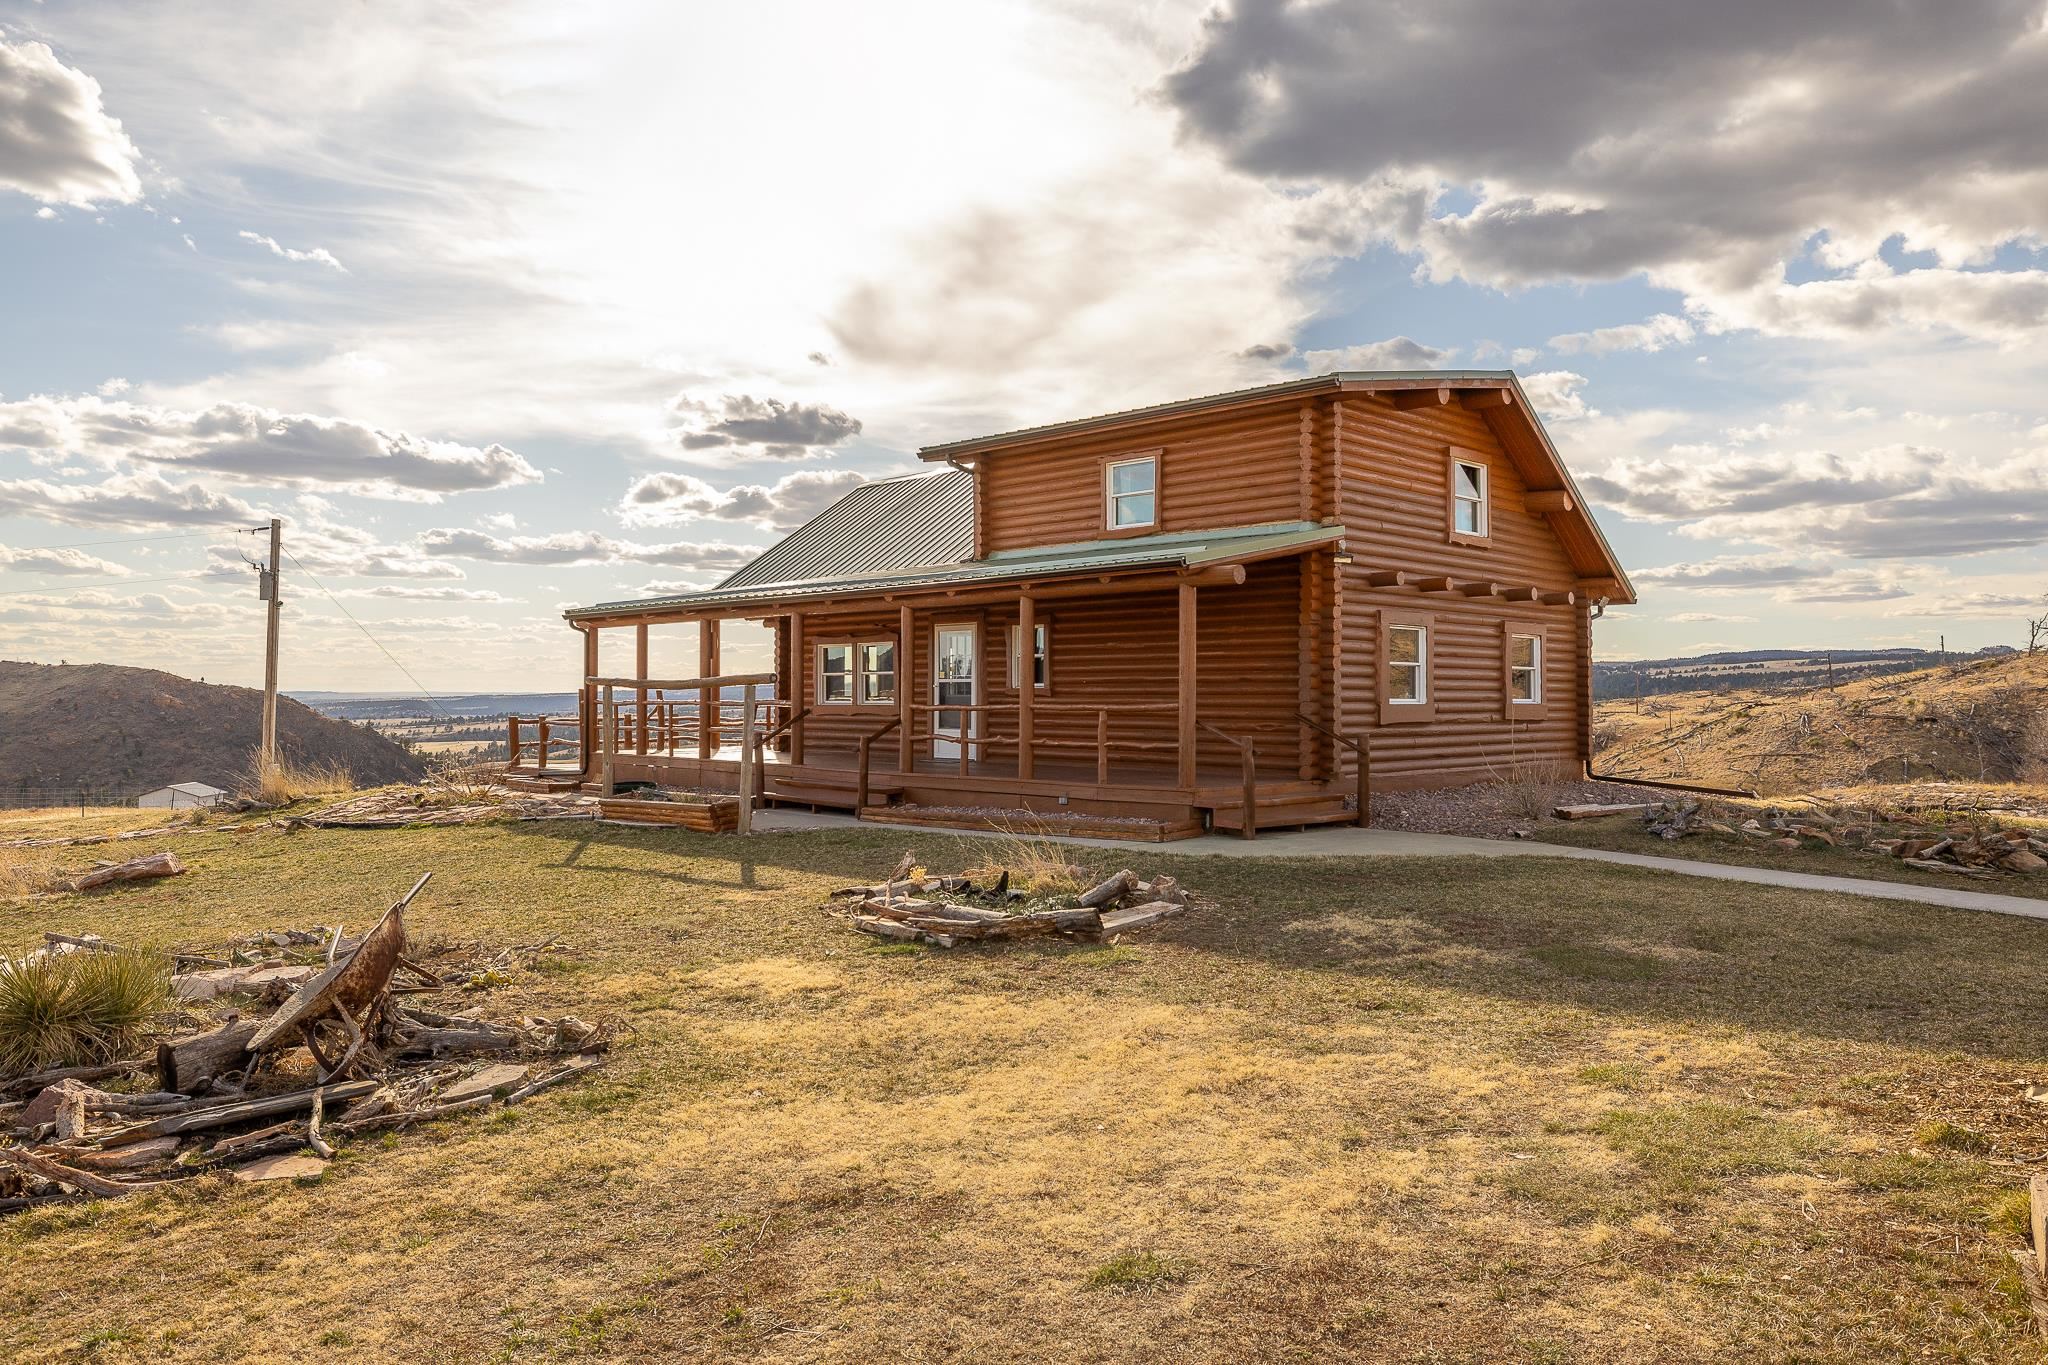 This beautiful Log Home sits on 3.81 acres